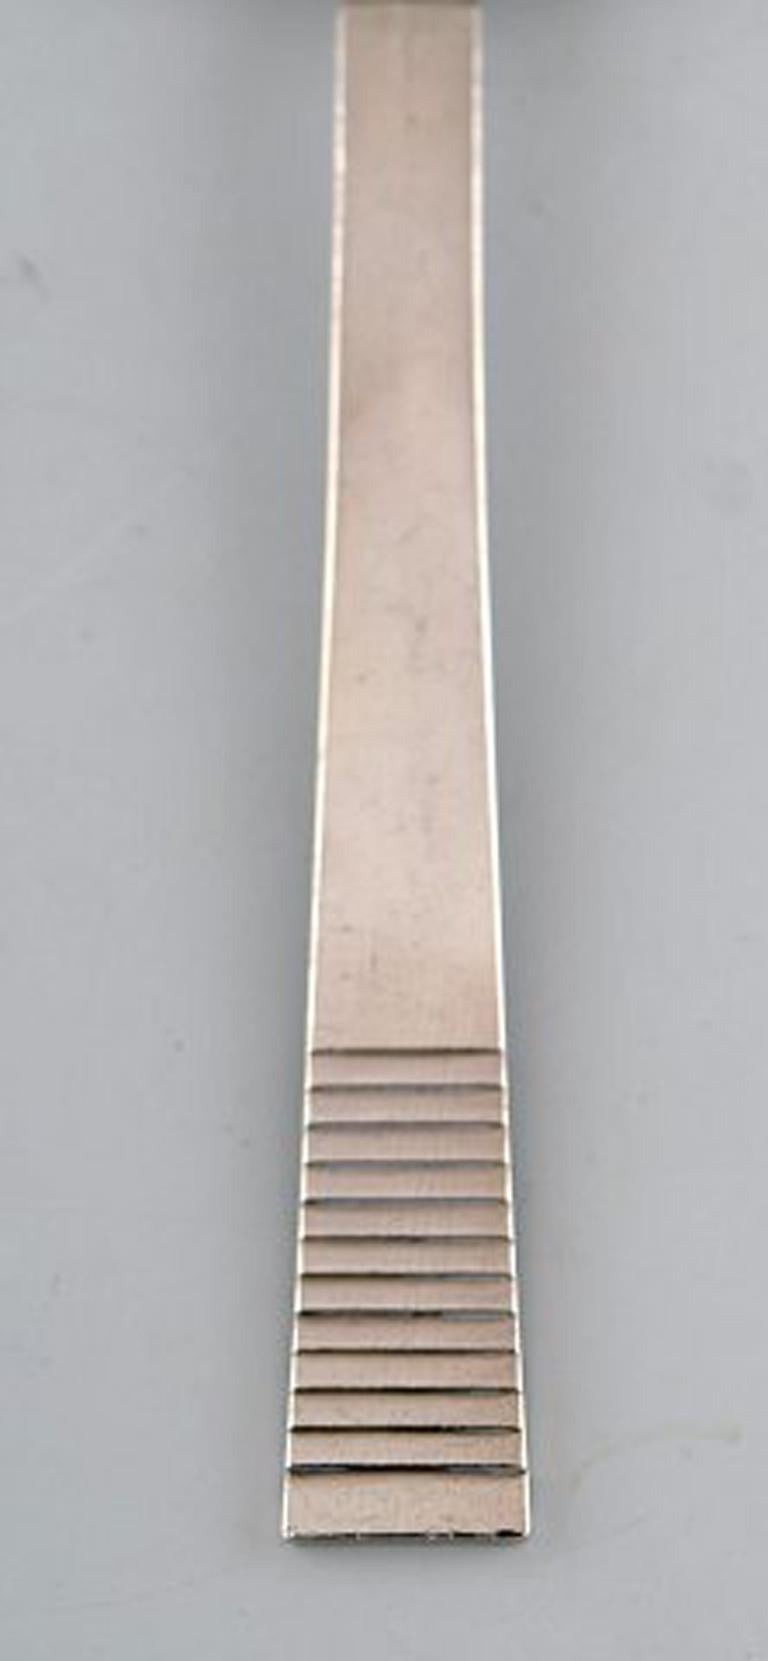 Georg Jensen Parallel. Sugar/Marmalade spoon in sterling silver.
Measures: 13.7 cm.
Stamped.
In good condition.